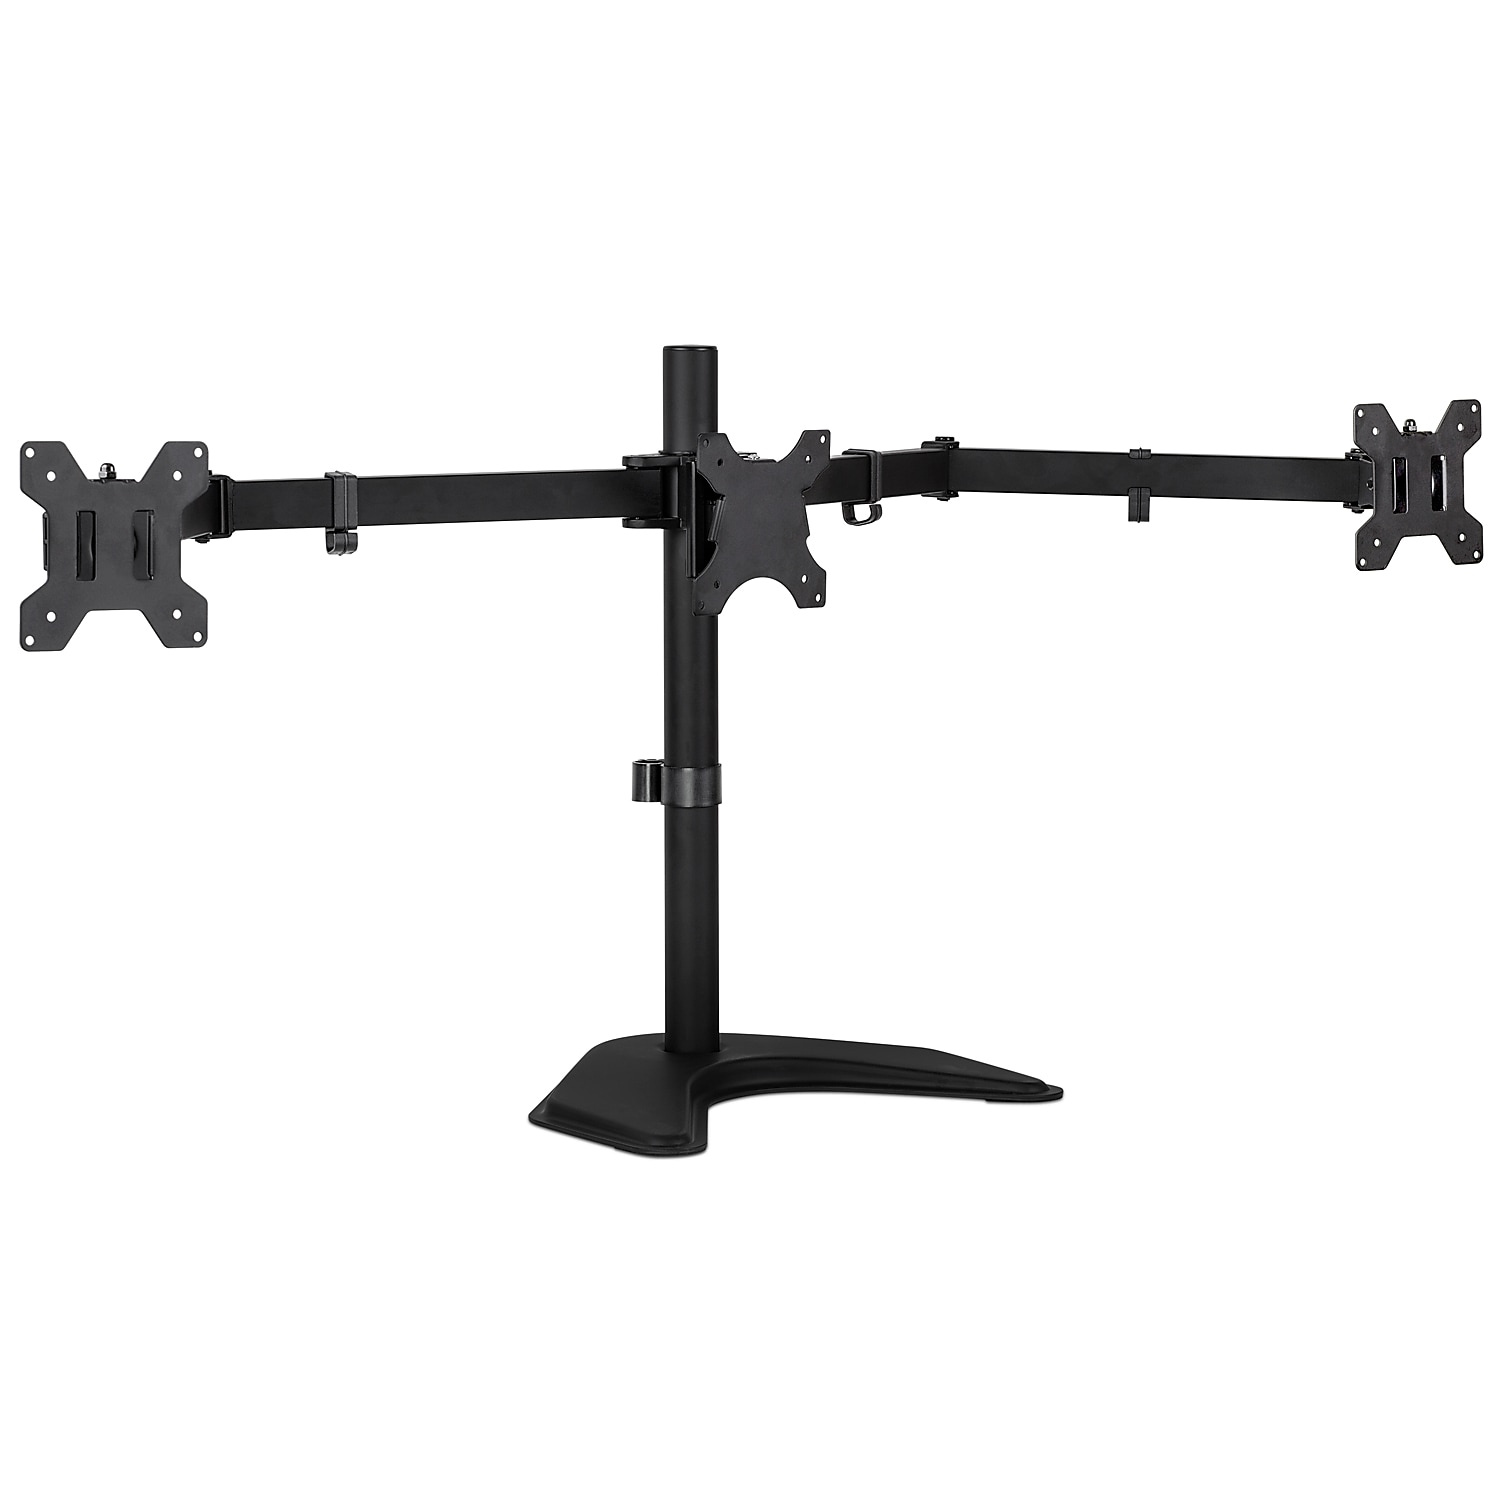 Adjustable Triple Monitor Stand, Up to 27", Black (MI-2789) Staples - $57.99